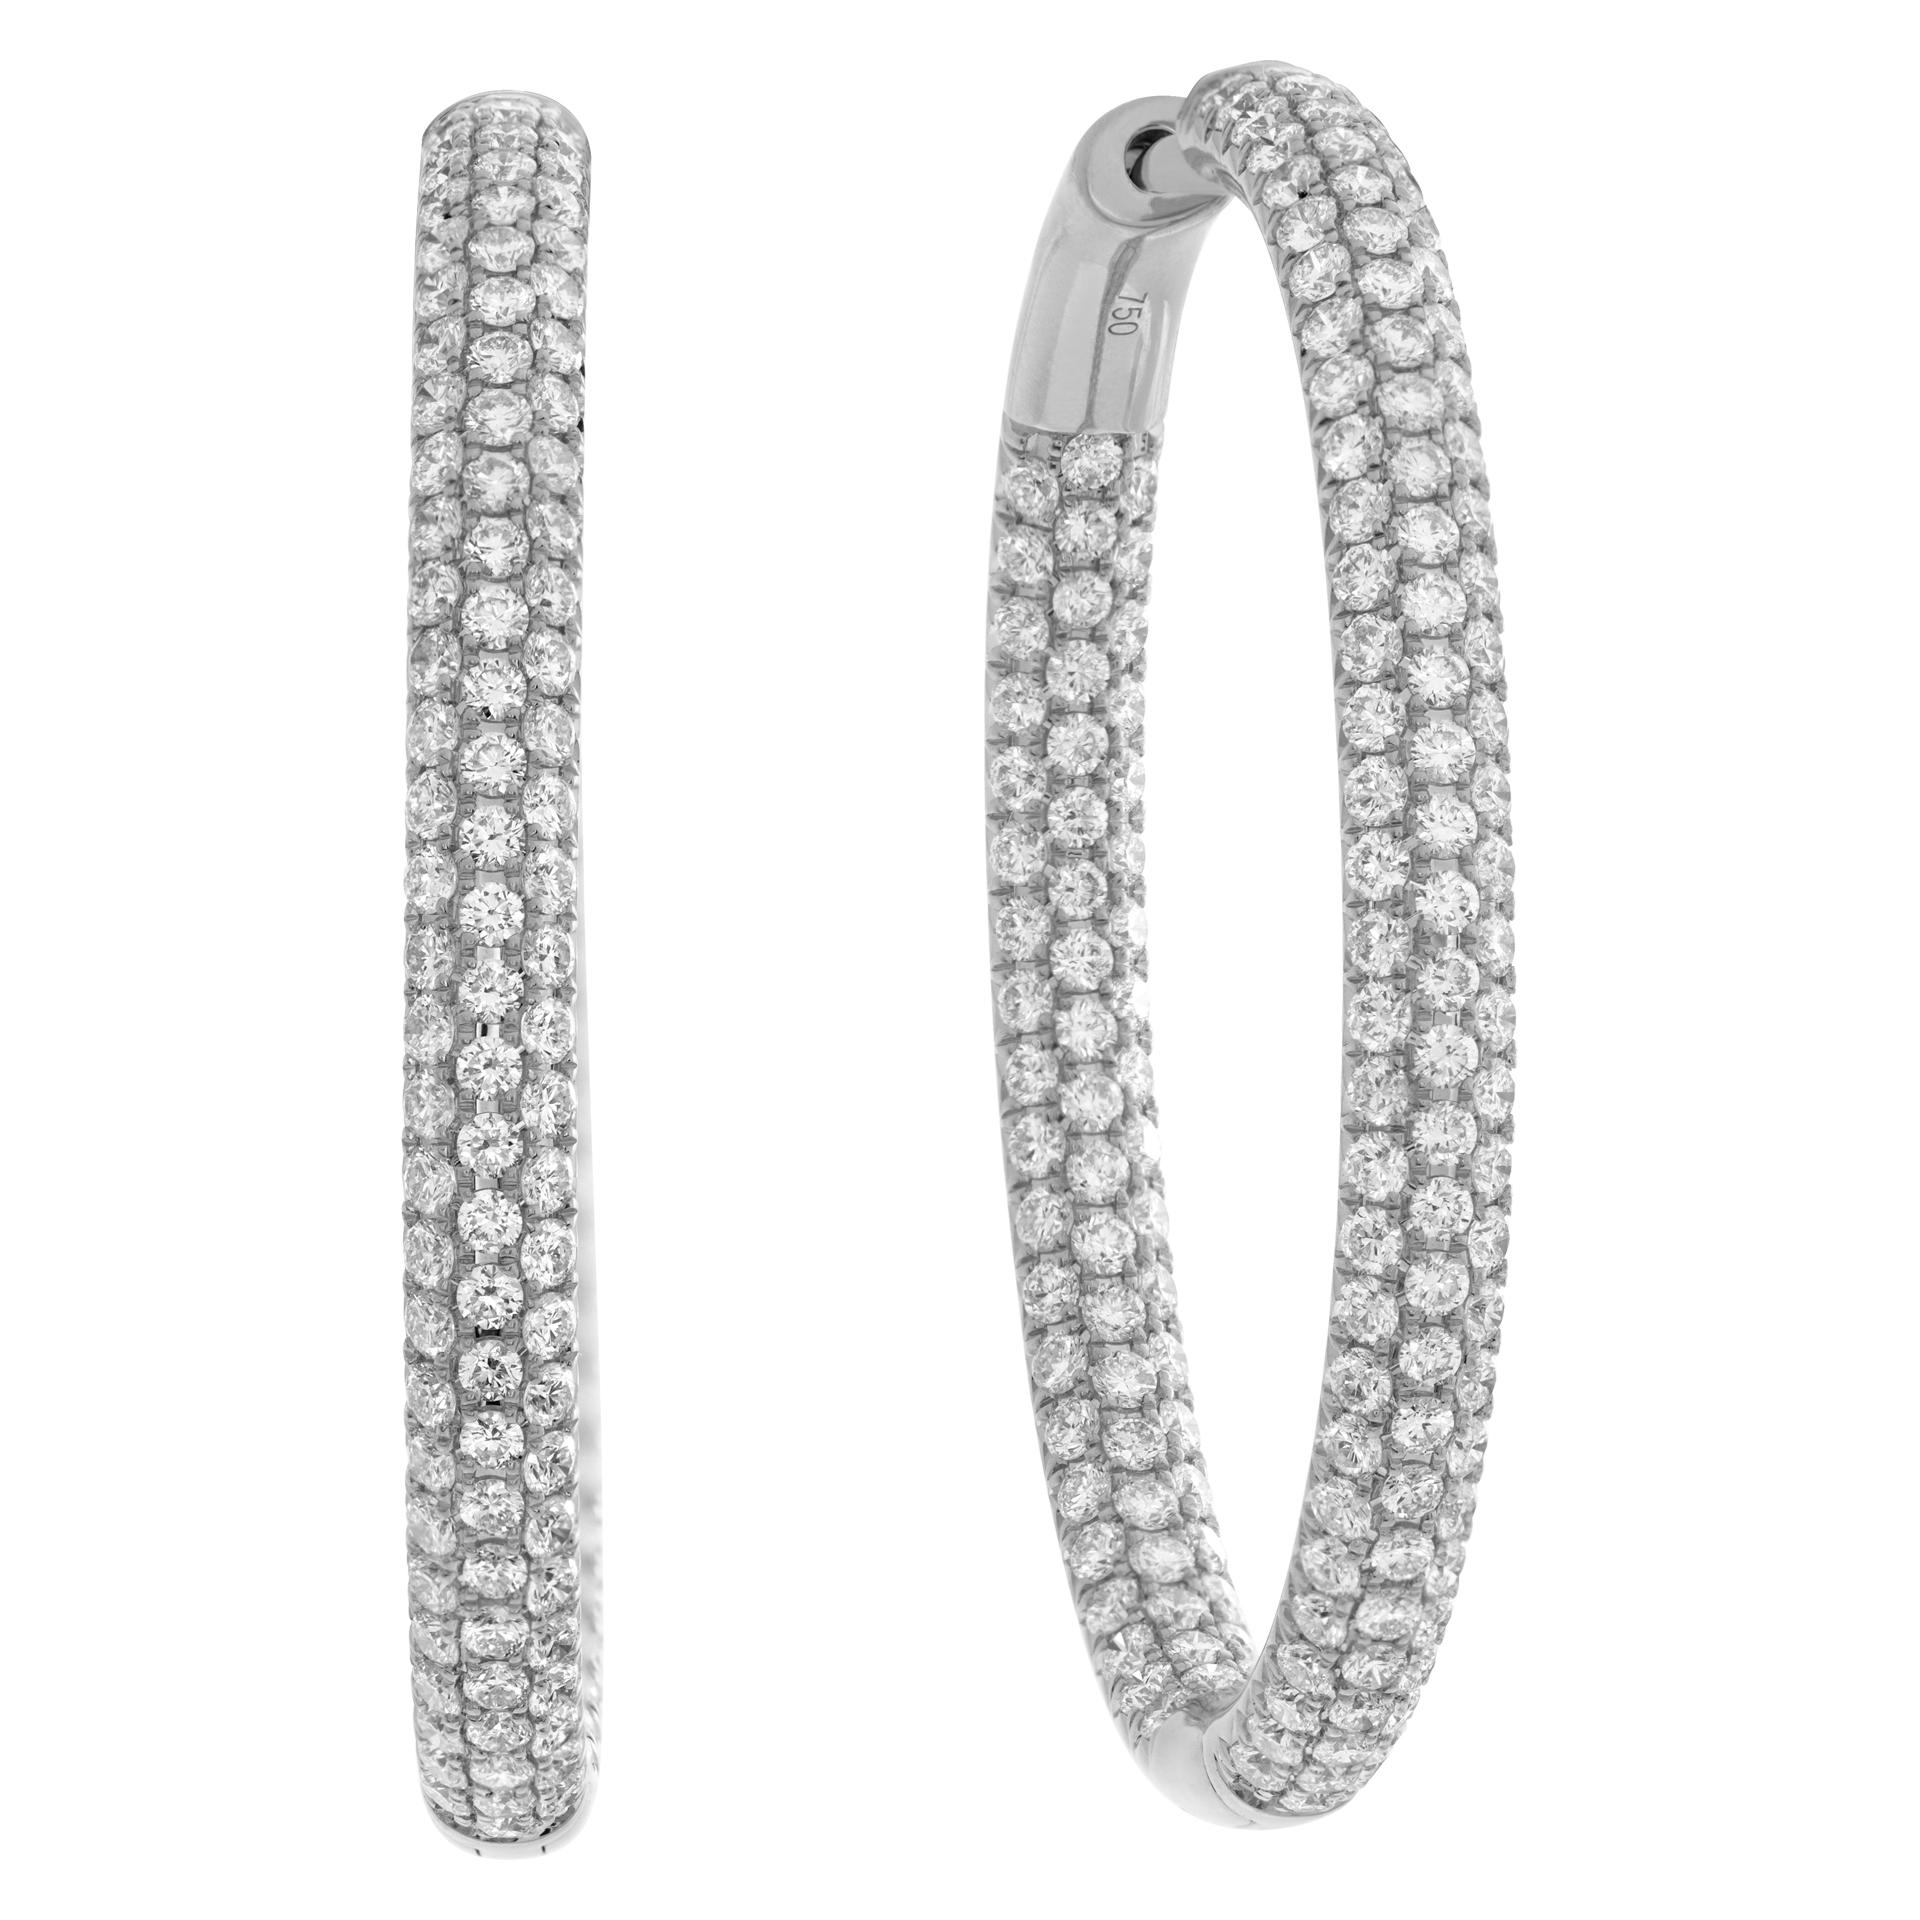 Dazzling 18k white gold inside out pave diamond hoop earrings with 5.63 carats in round diamonds (G-H Color, VS Clarity). Drop length: 1.75'', width: 0.15''.